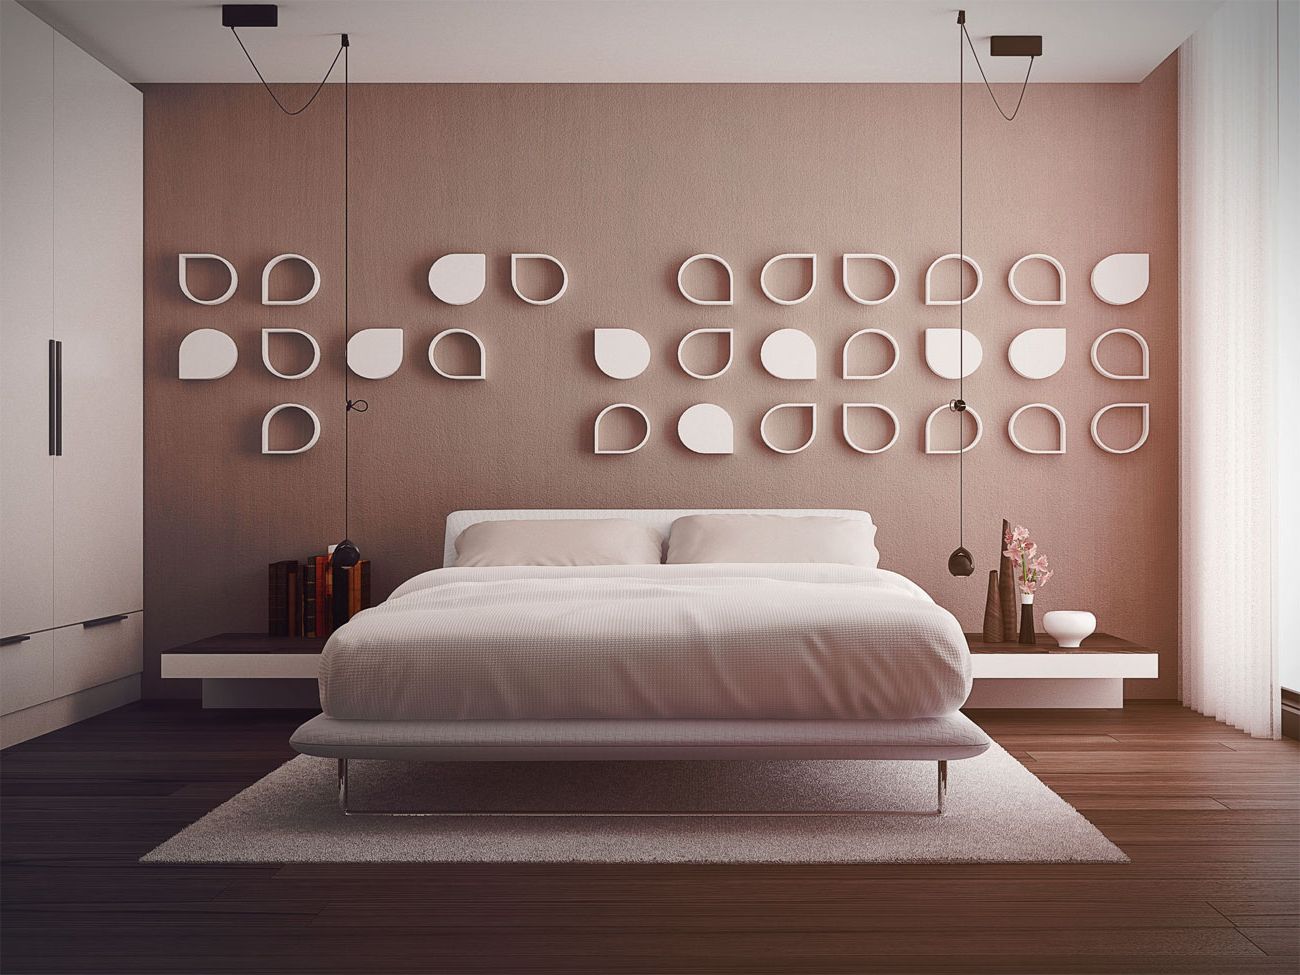 Quirky Bedroom Wall Decor Design Plus Flawless Bedding Set Idea And Tiny Black Low Ceiling Lights (Photo 2648 of 7825)